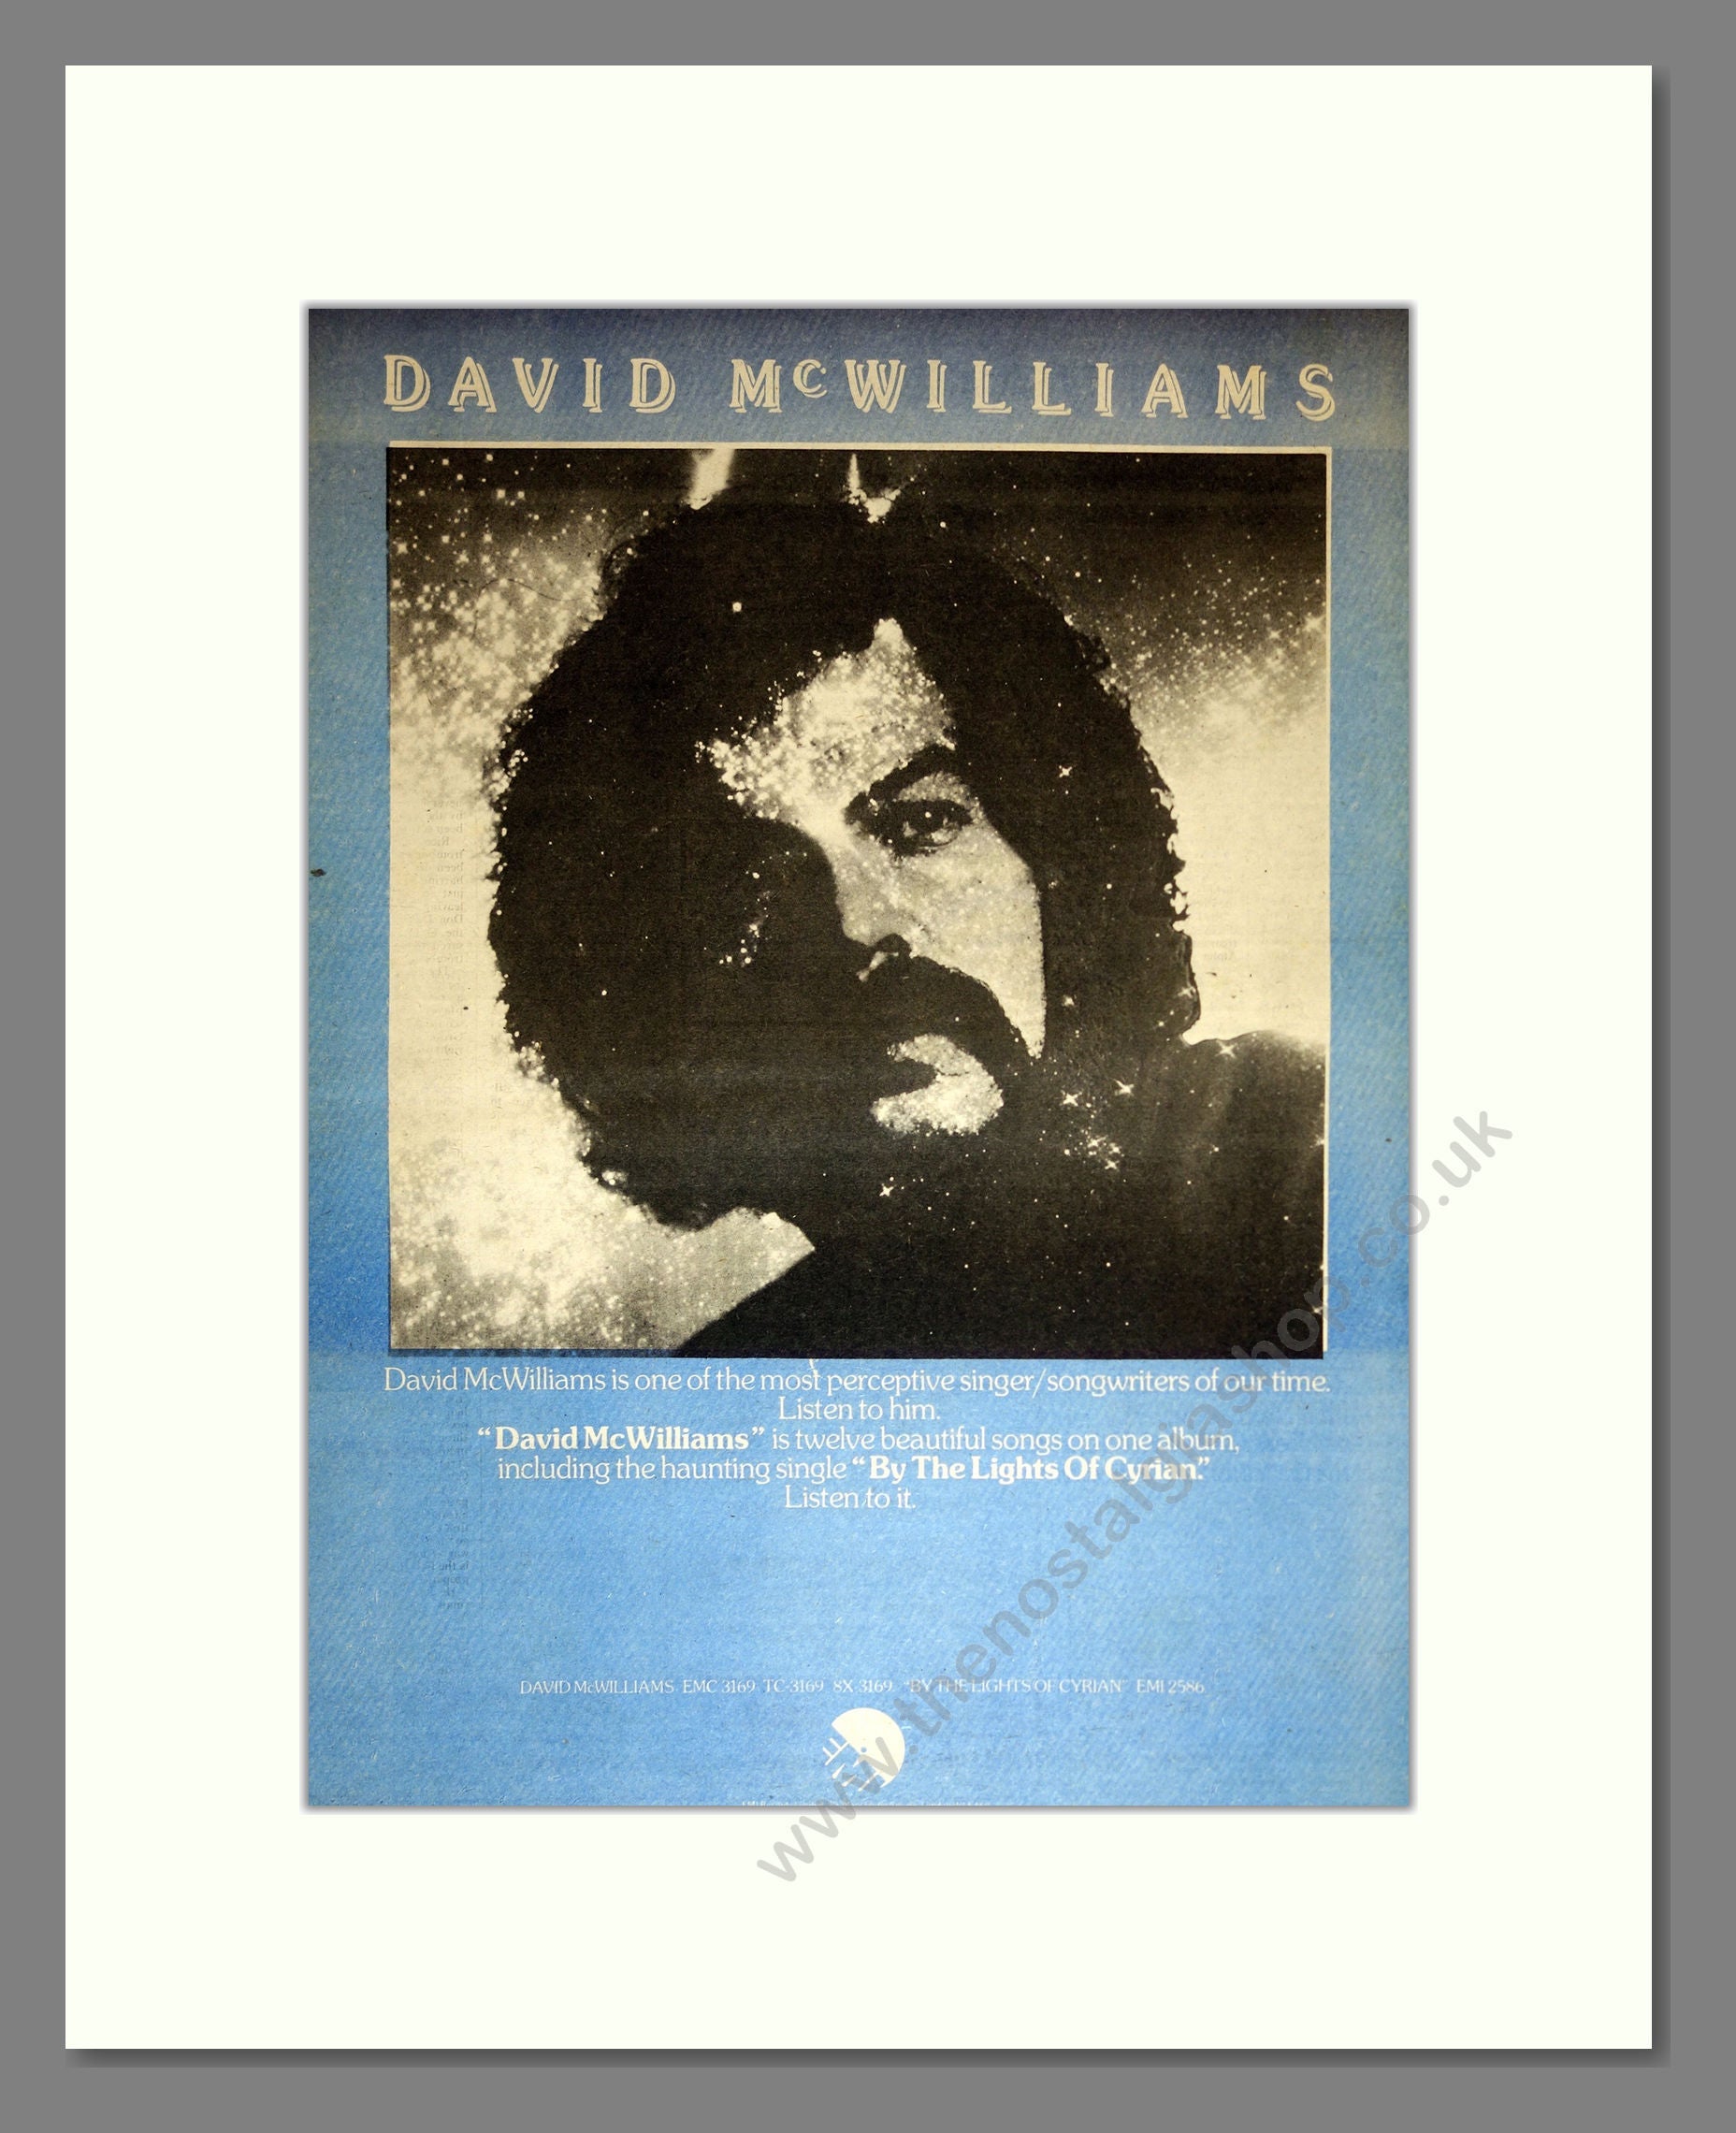 David McWilliams - By The Lights Of Cyrian. Vintage Advert 1977 (ref AD16987)